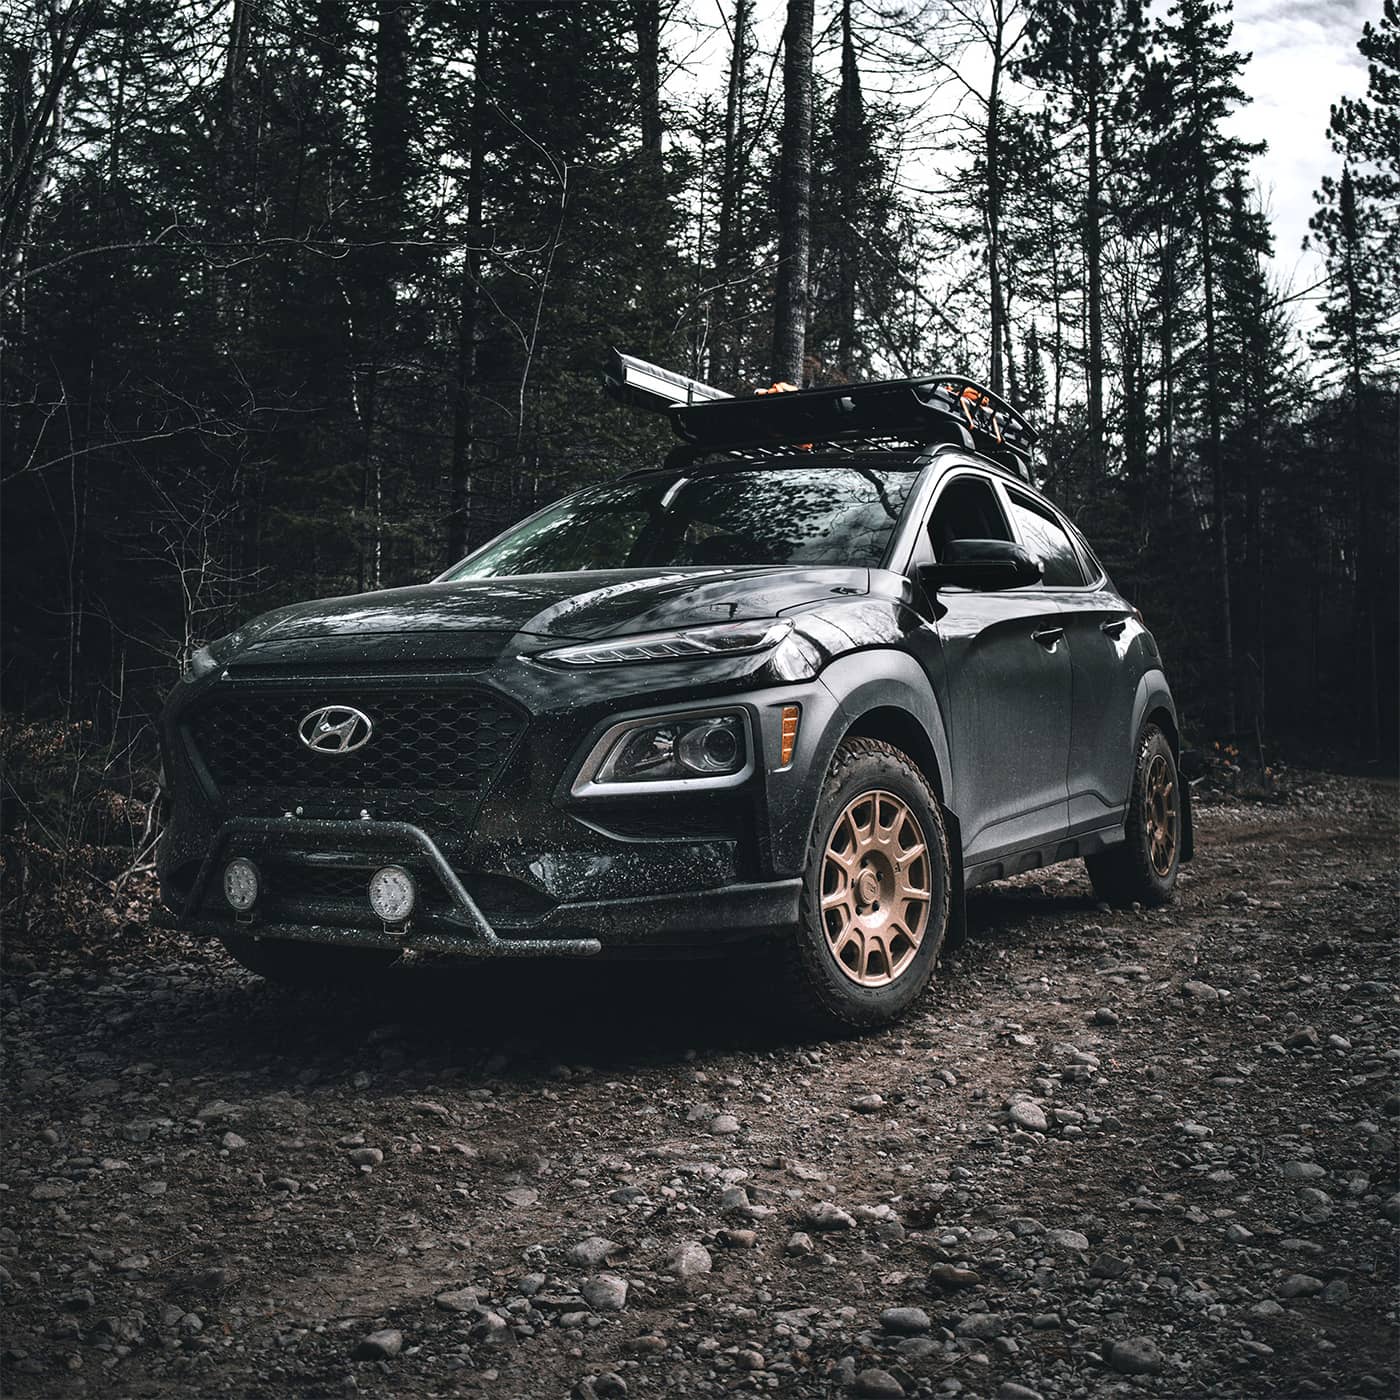 First Ever Lifted Hyundai Kona Off road Adventure Build ...